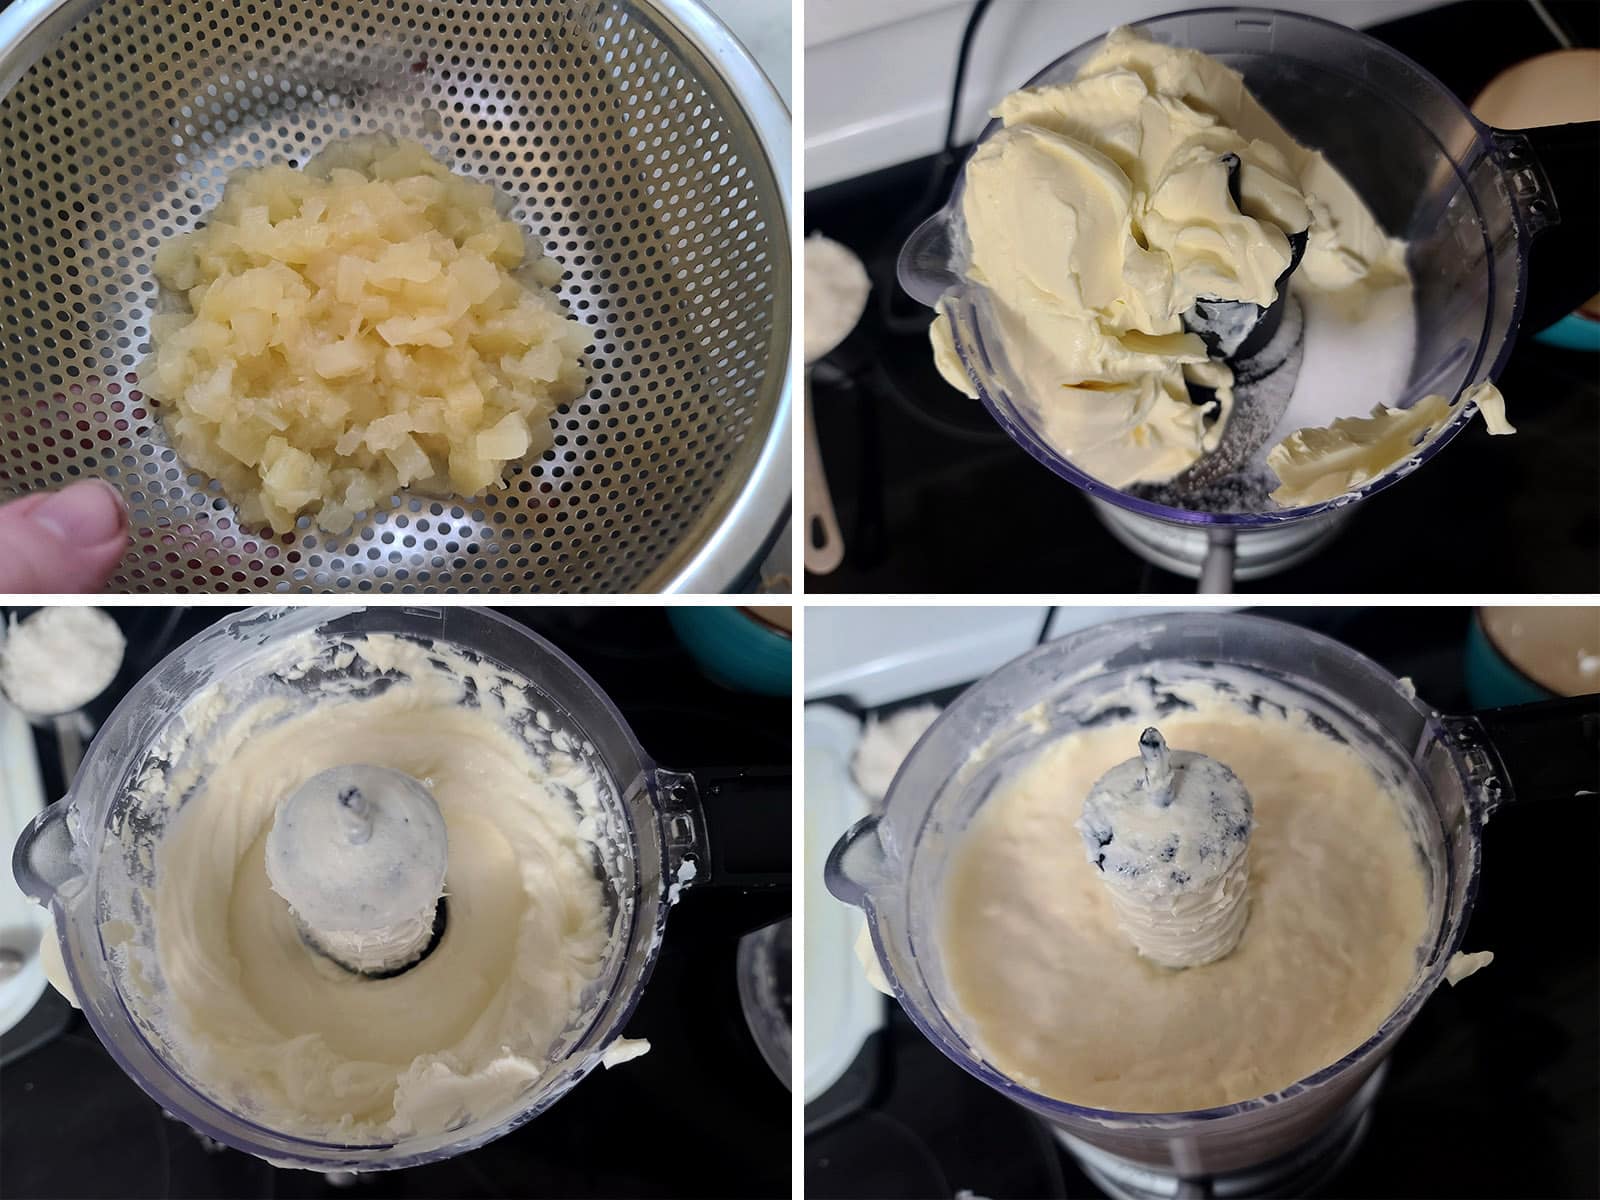 A 4 part image showing the pineapple draining, the being pureed with softened cream cheese.